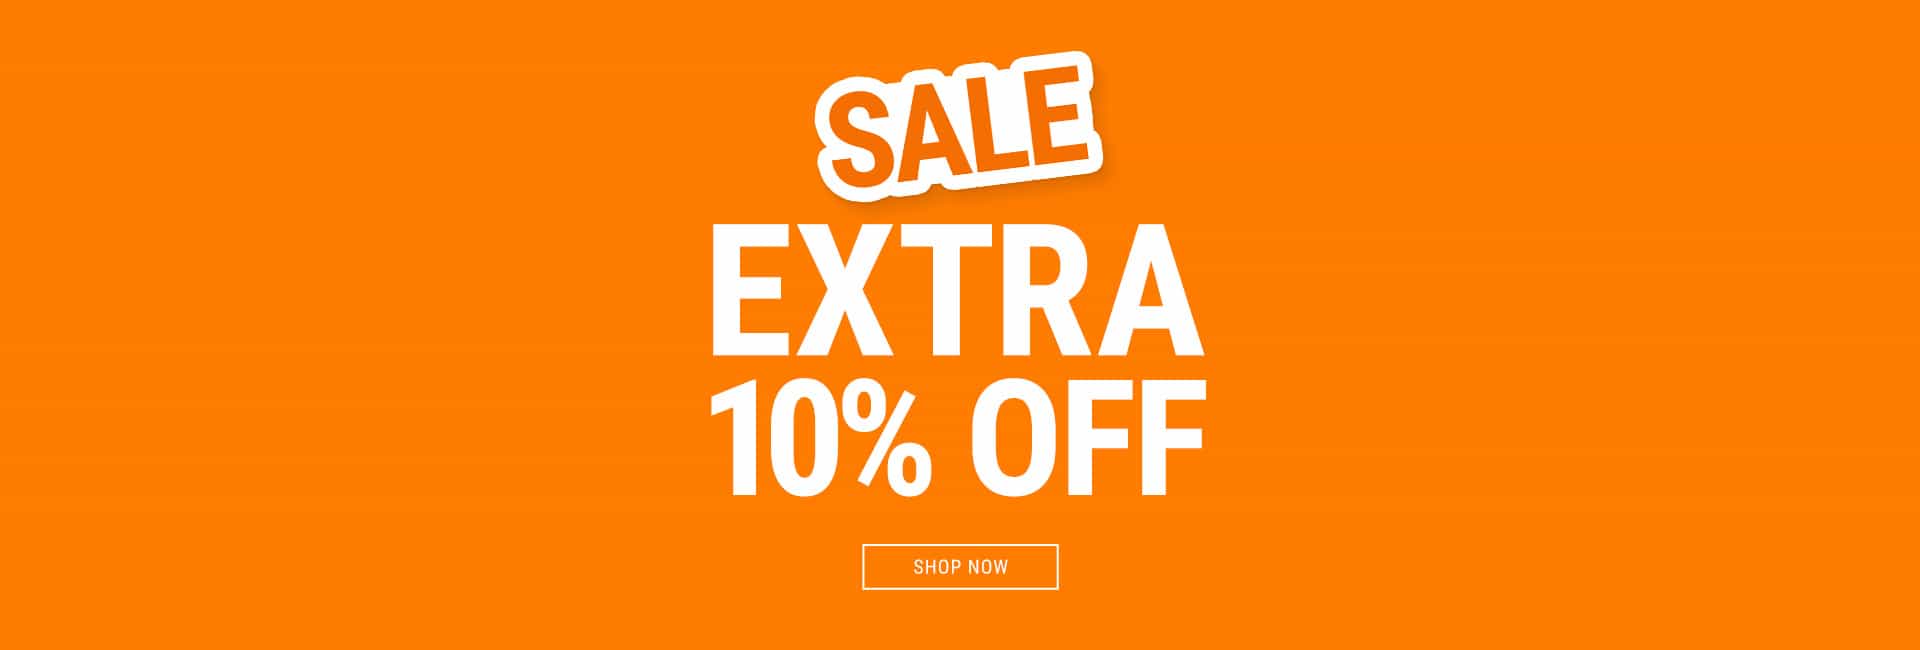 Shh, Up to 60% OFF sale items + extra 10% OFF with coupon @ Wiggle